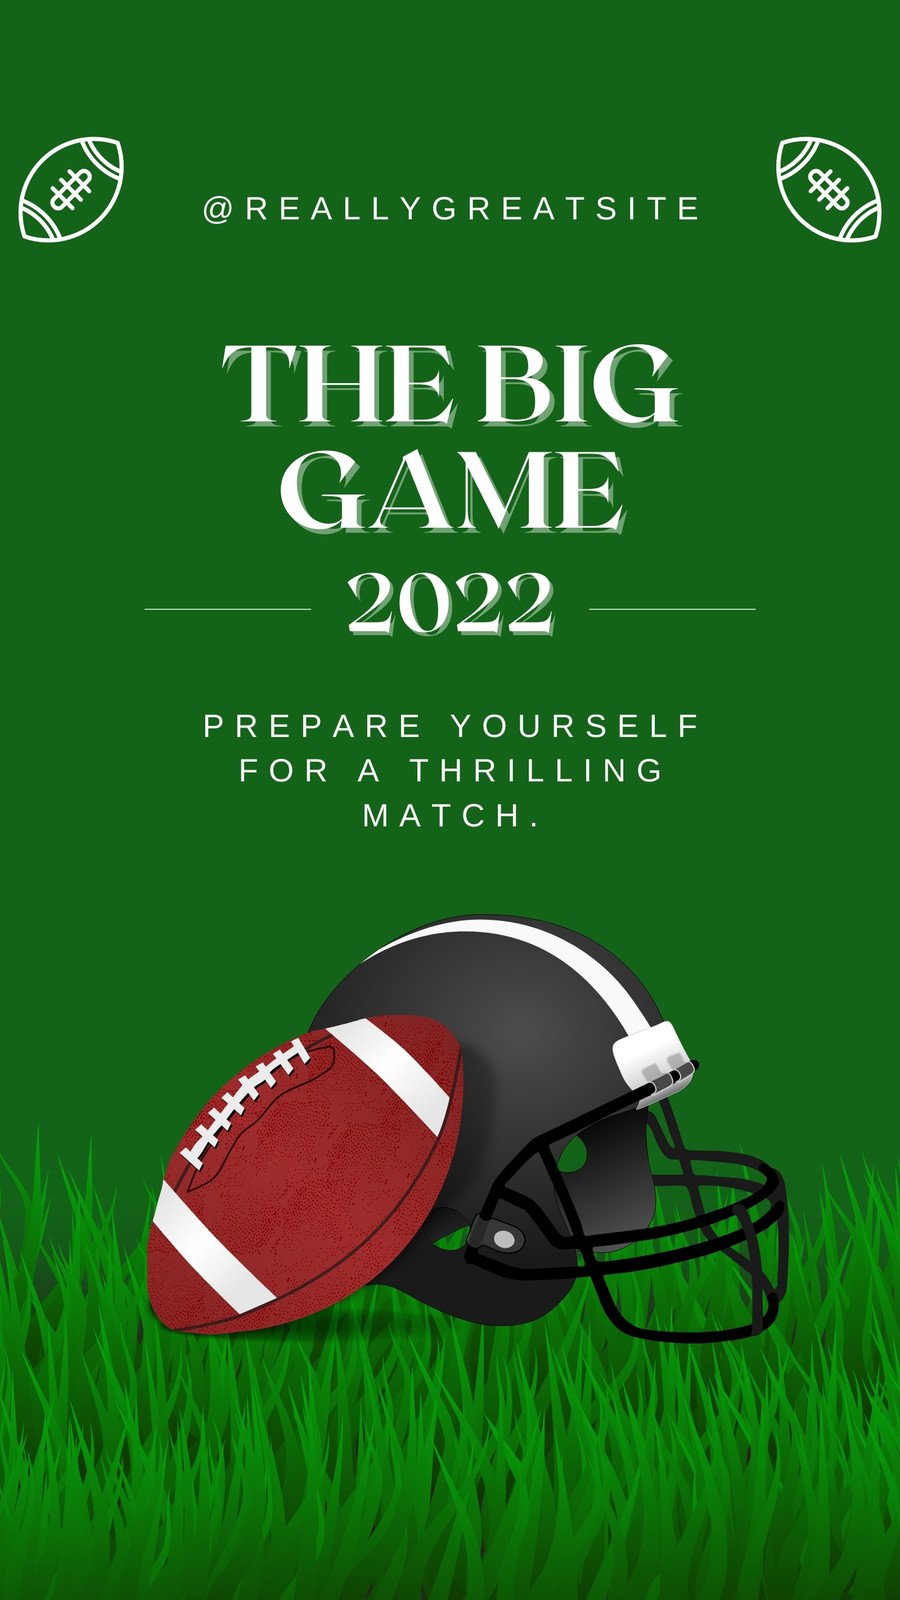 https://marketplace.canva.com/EAE4Ypm55T4/1/0/900w/canva-green-%26-white-illustrated-the-big-game-instagram-story-BnoYf6m83Ho.jpg